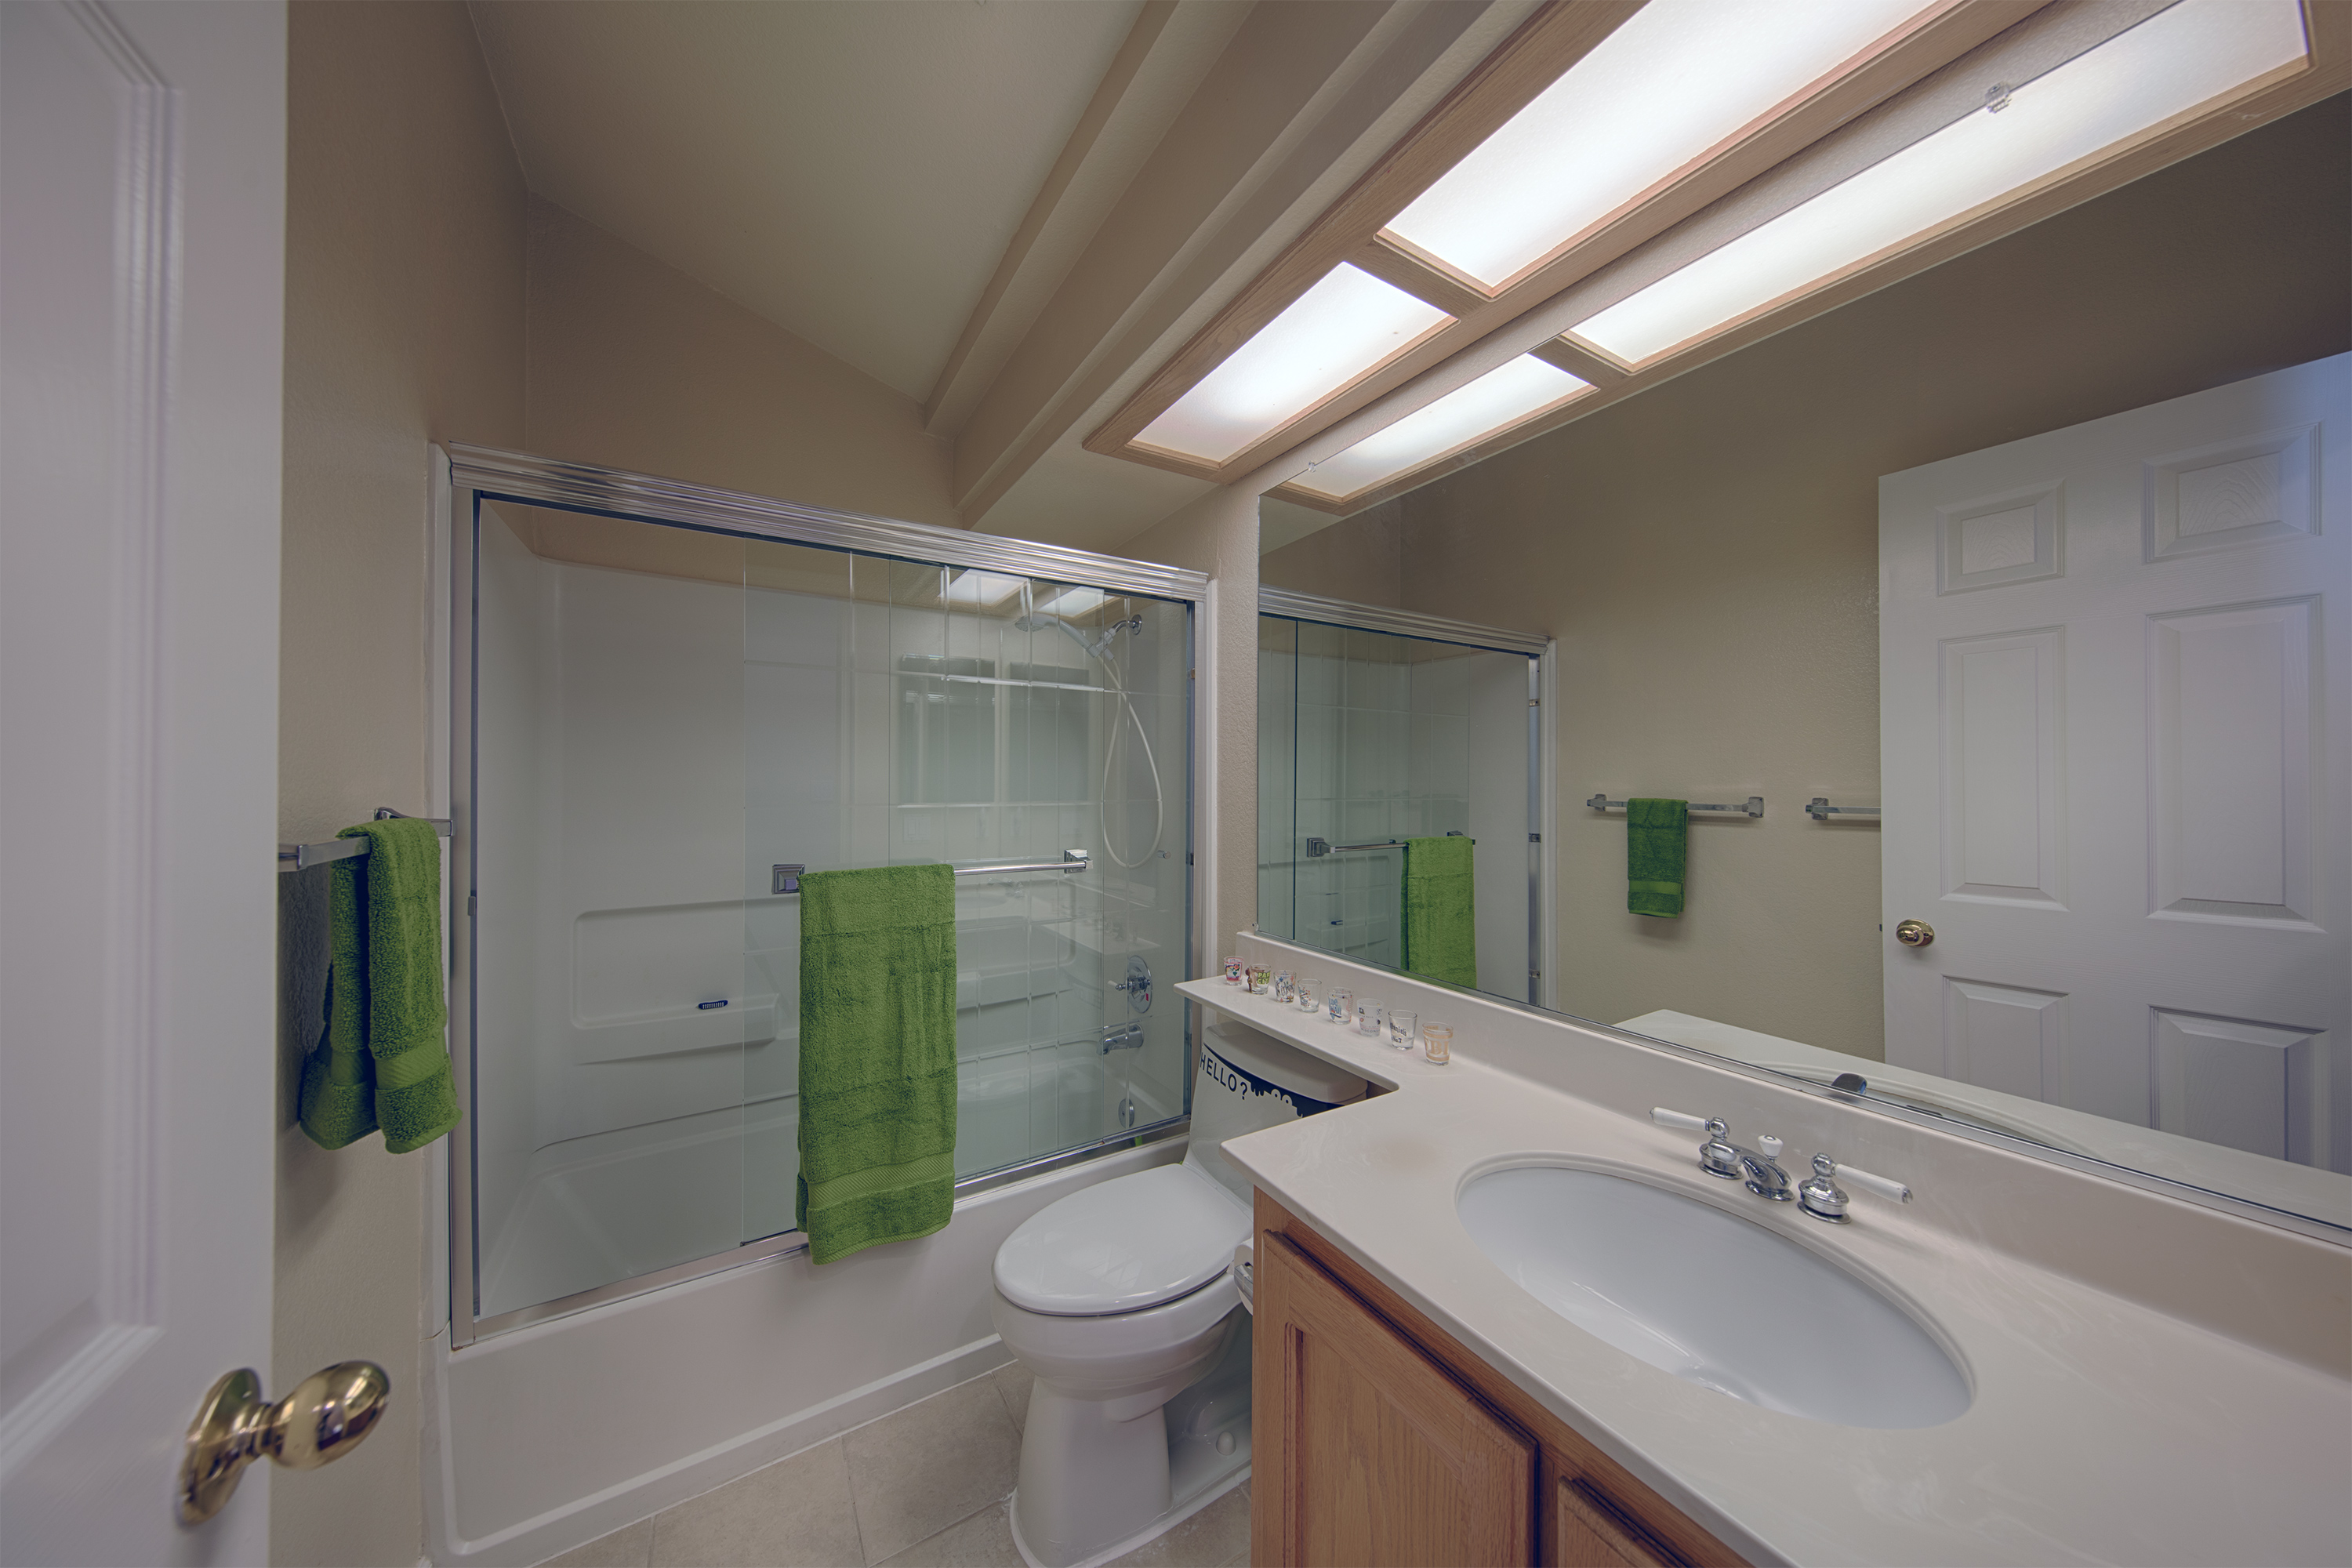 34383 Mimosa Ter, Fremont 94555 - Bathroom 2 (A)